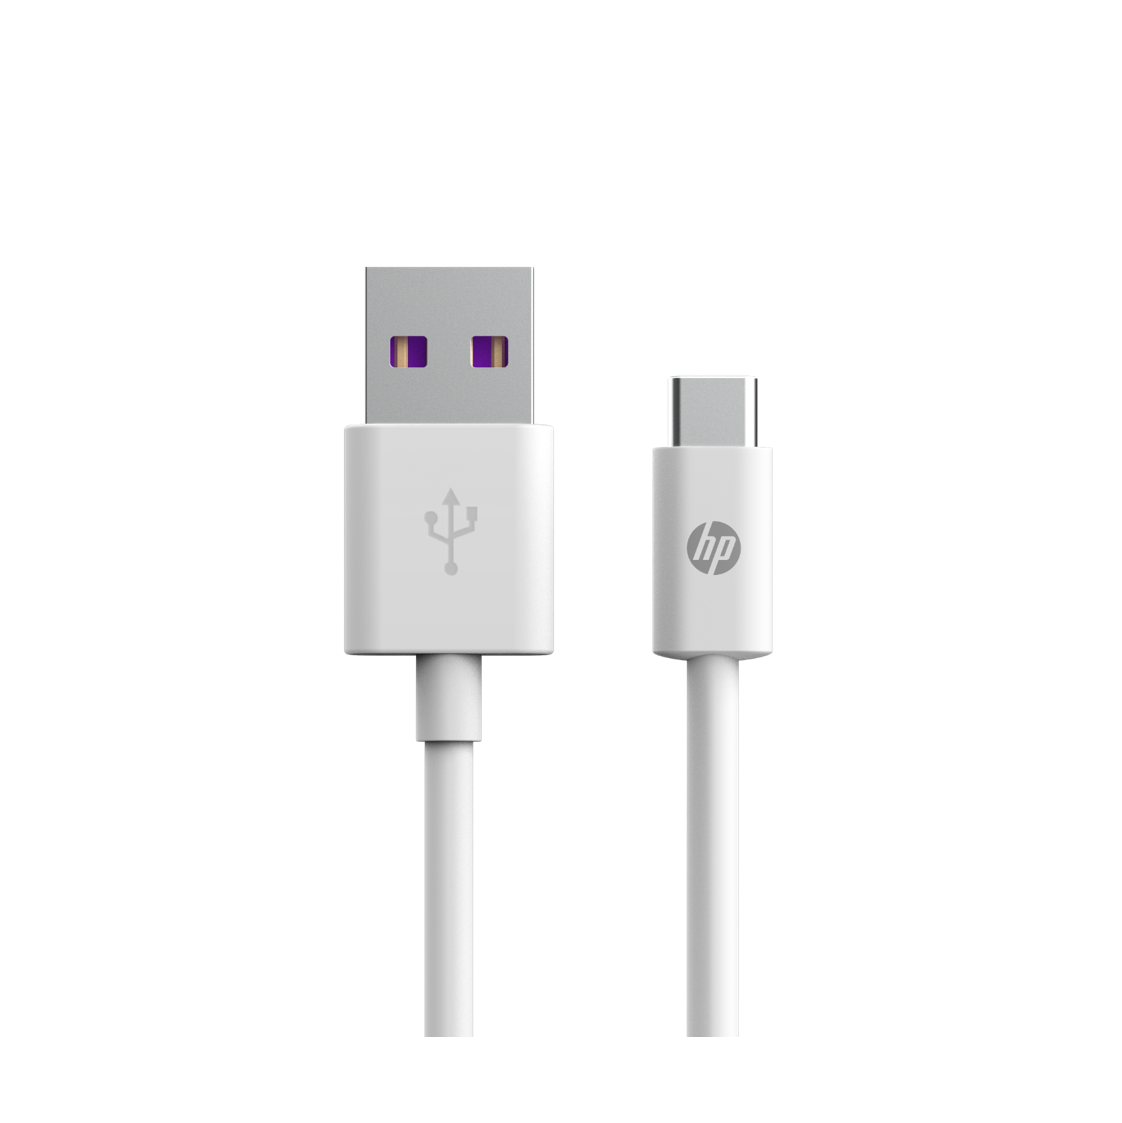 HP USB2.0 A to C Cable DHC-TC100